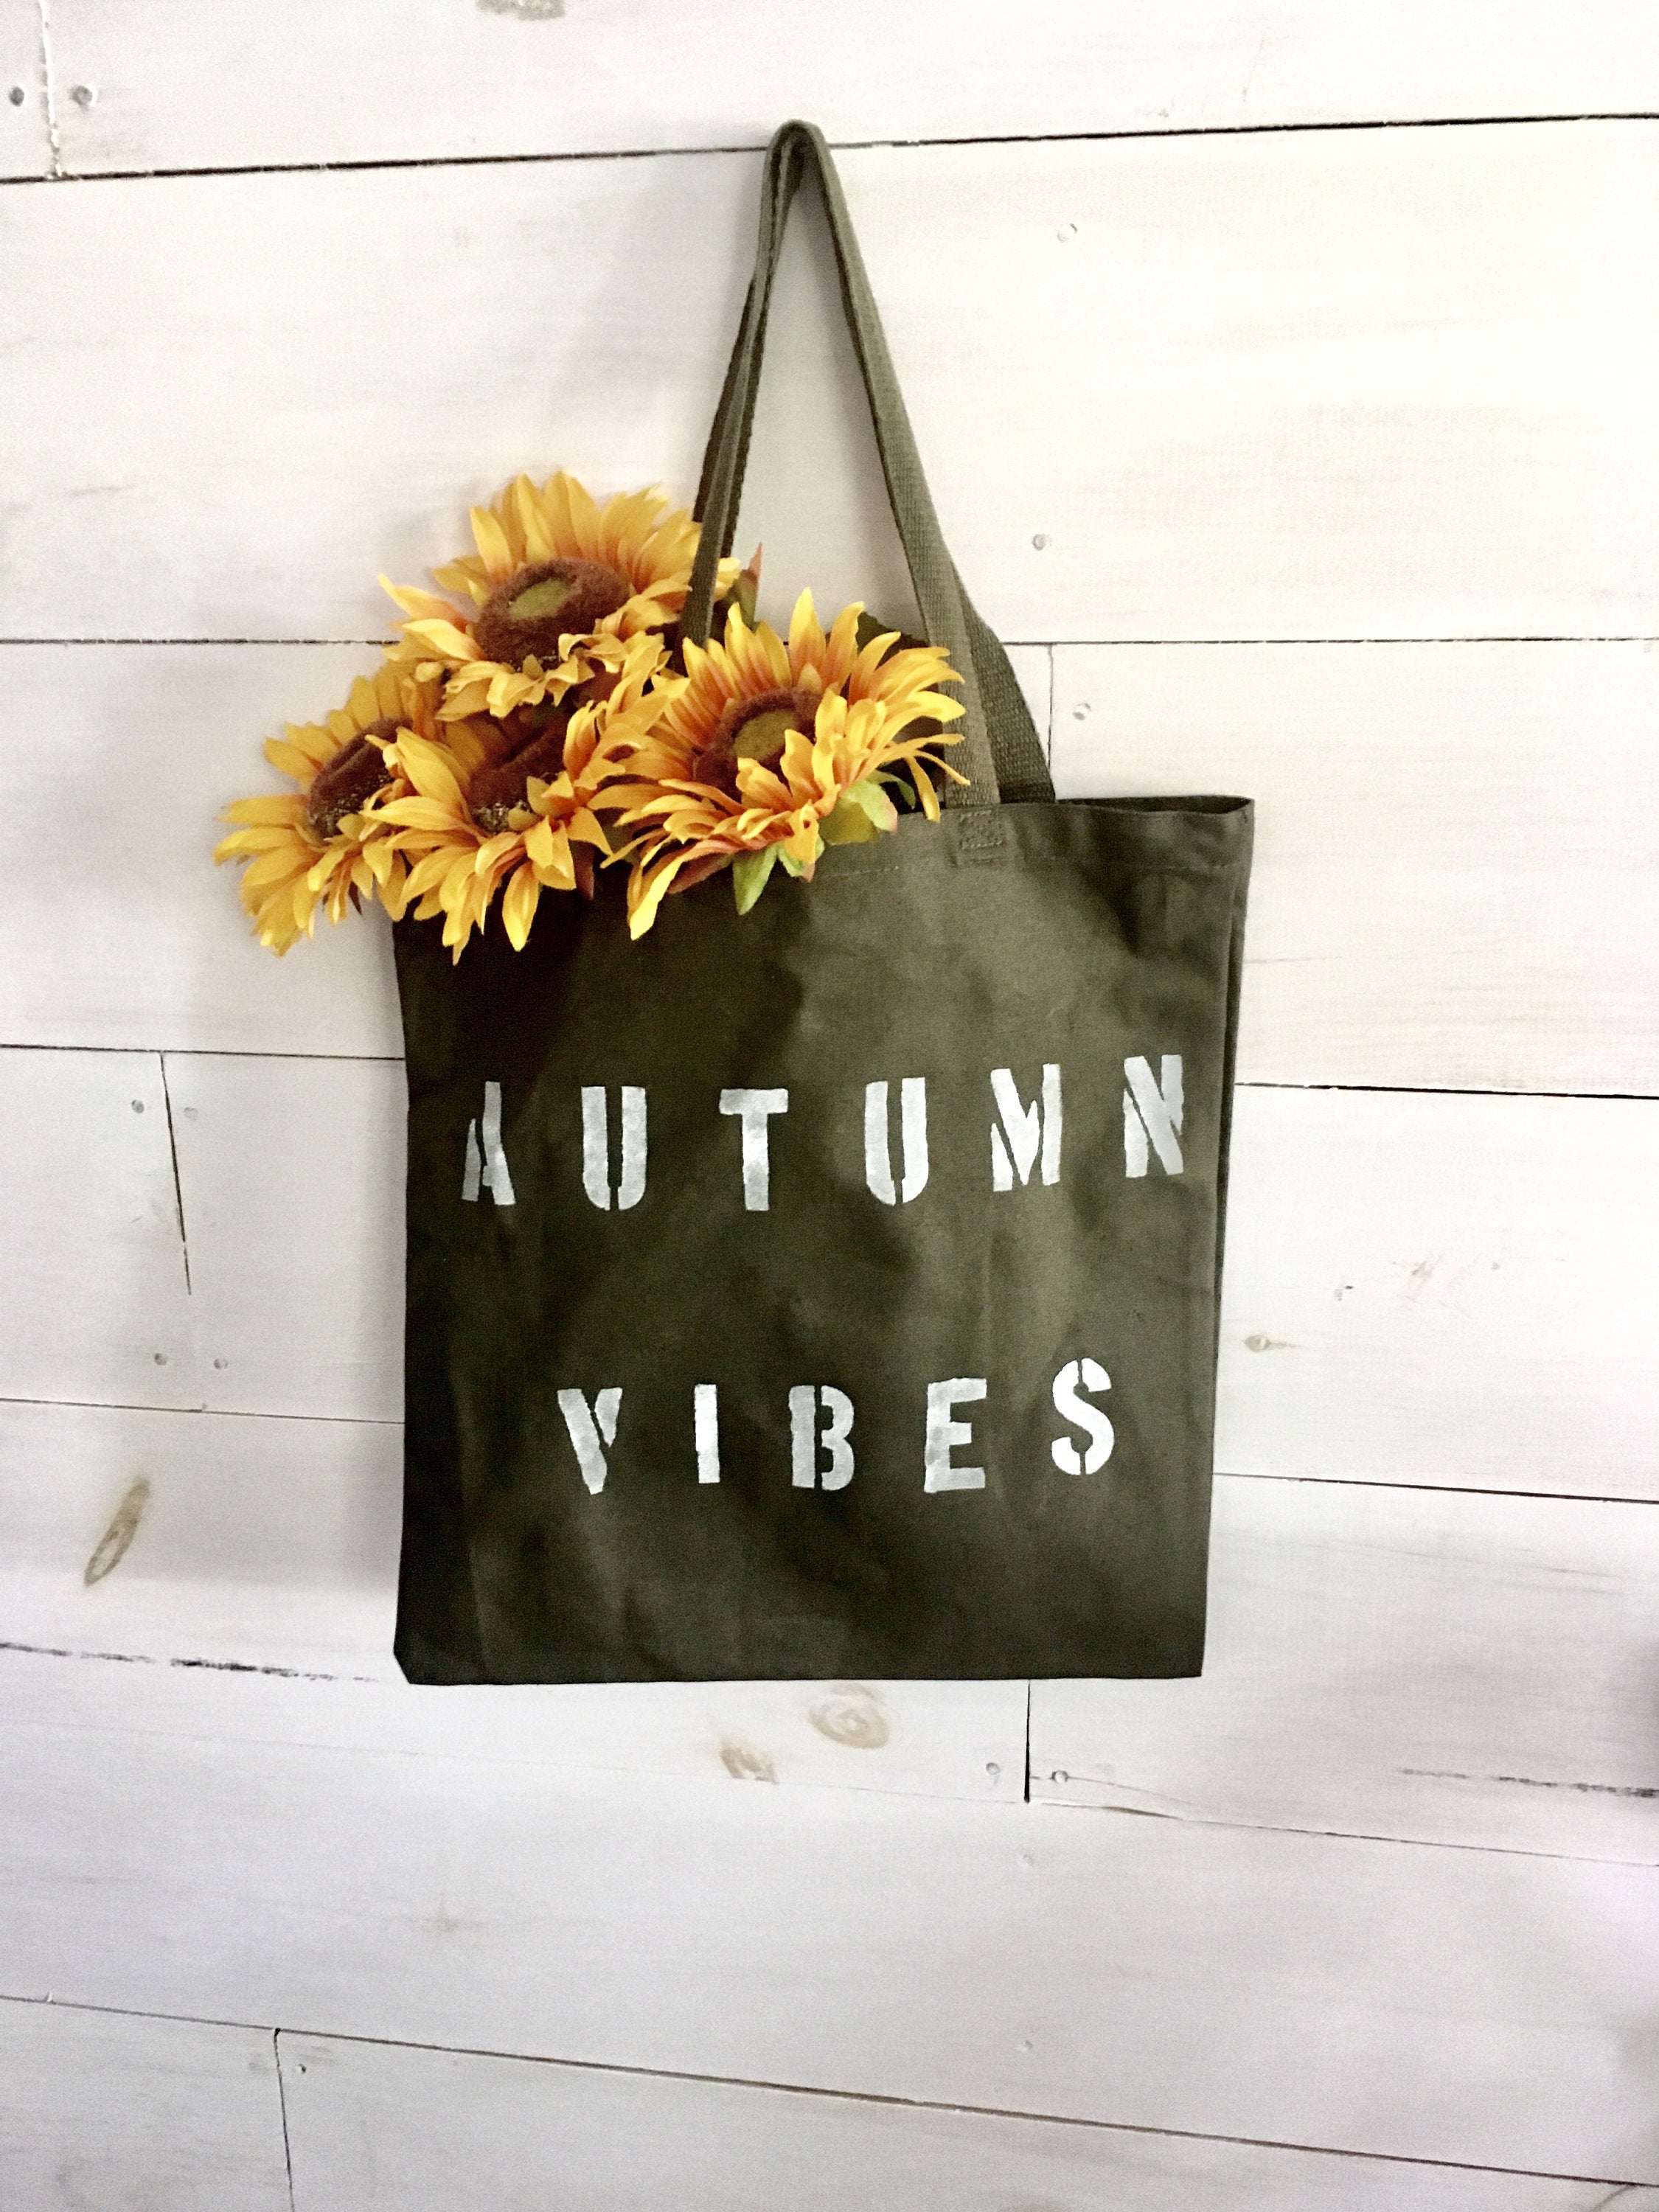 AUTUMN VIBES army green reusable shopping tote